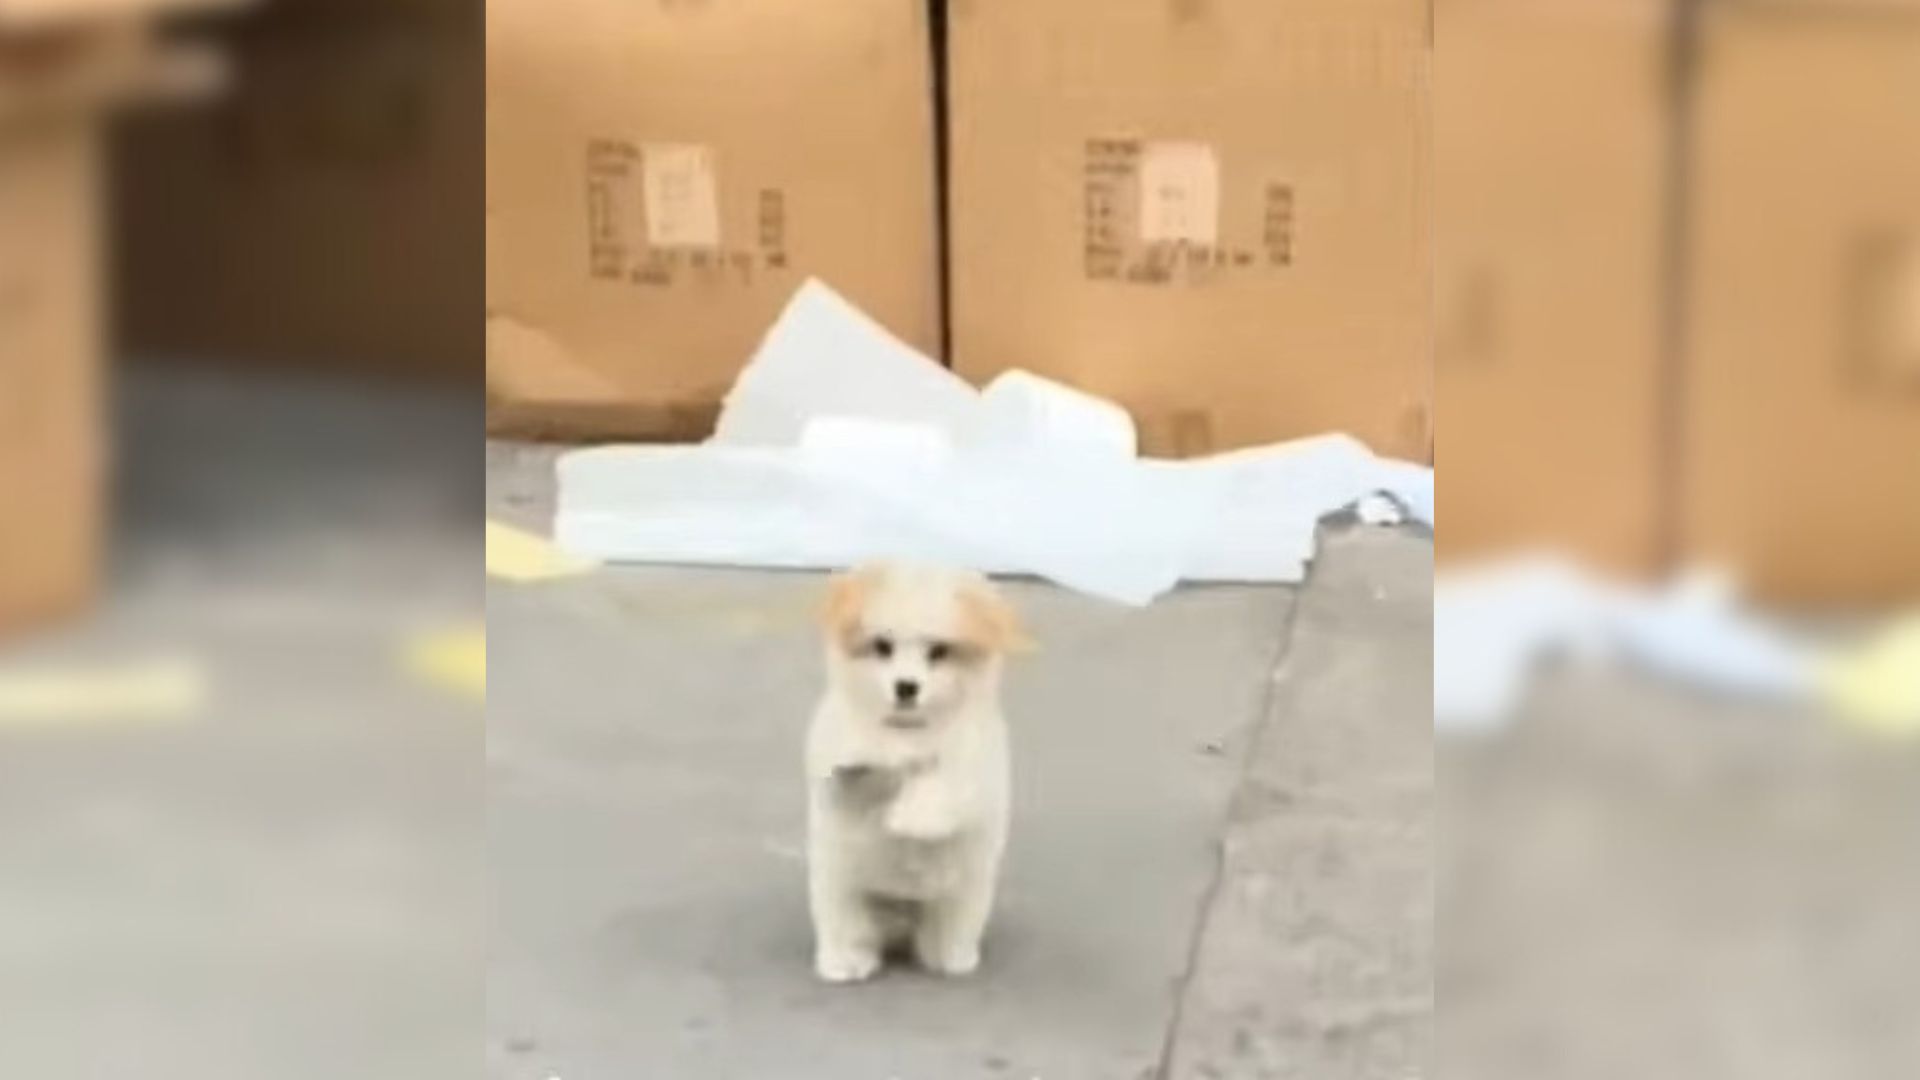 Adorable Stray Puppy In Search Of Love Raised Her Paws, Trying To Attract The Attention Of Passers-By